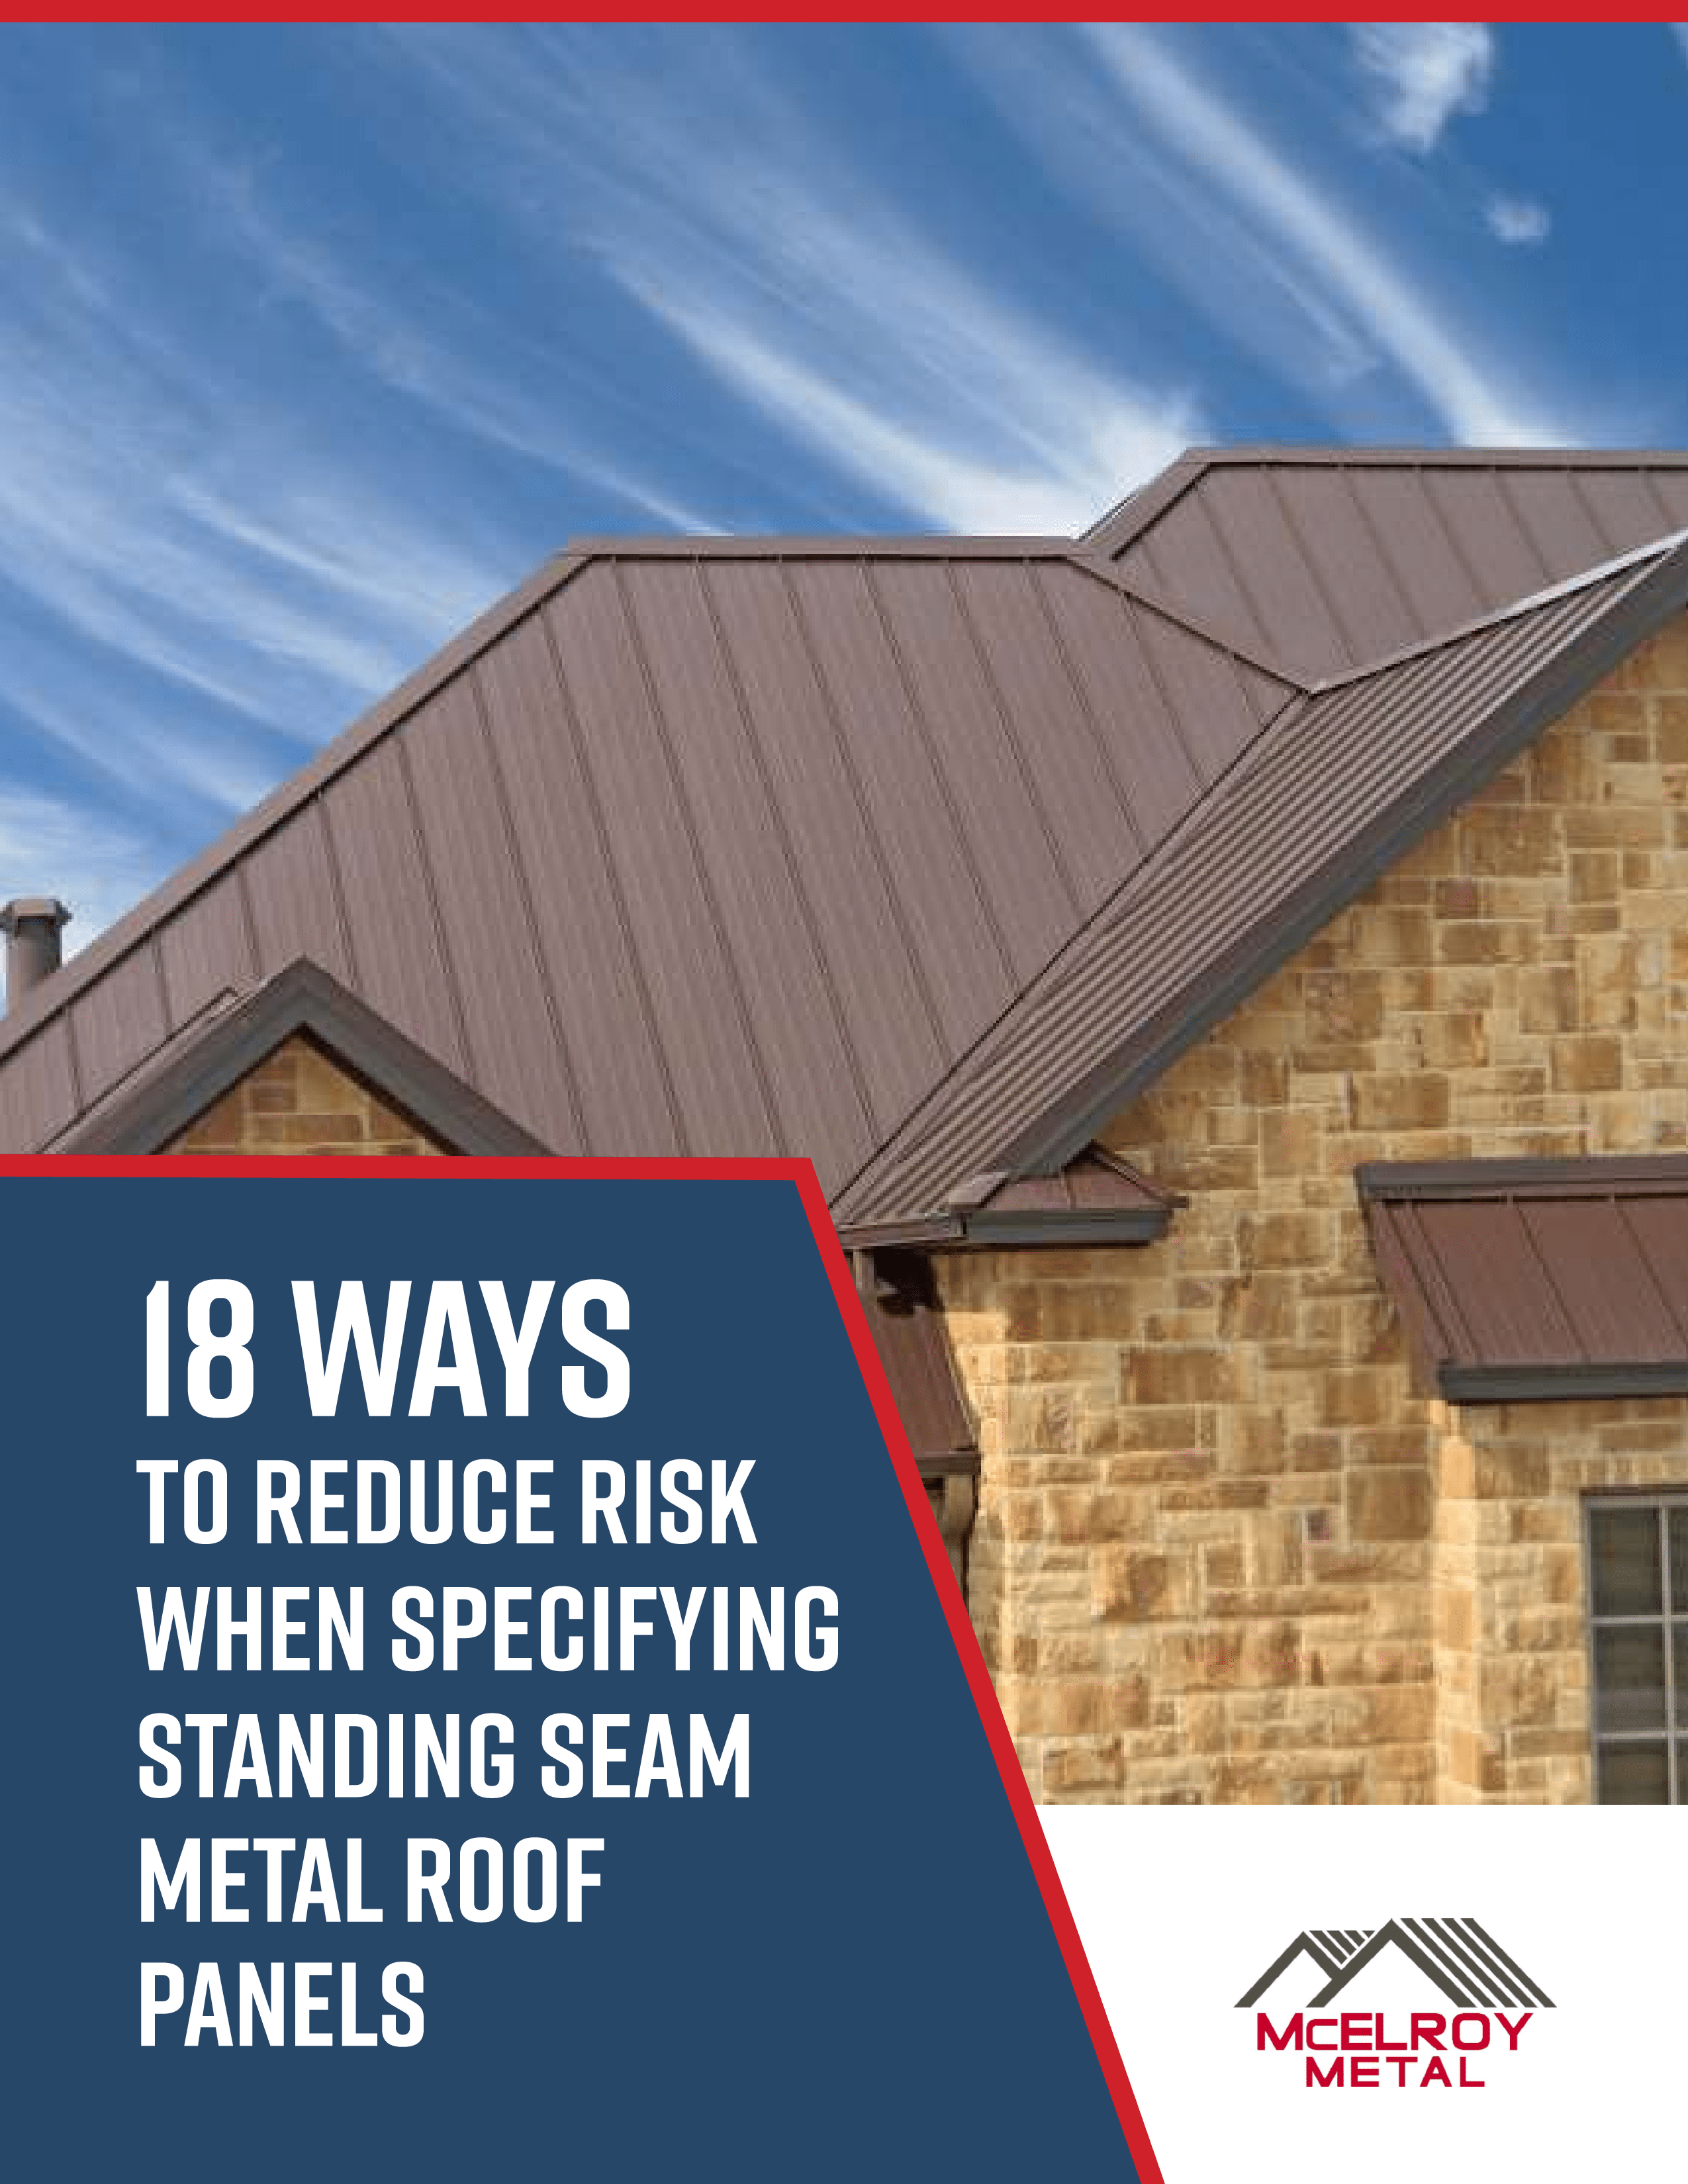 McElroy Metal eBook - 18 Ways to Reduce Risk  When Specifying  Standing Seam  Metal Roof  Panels